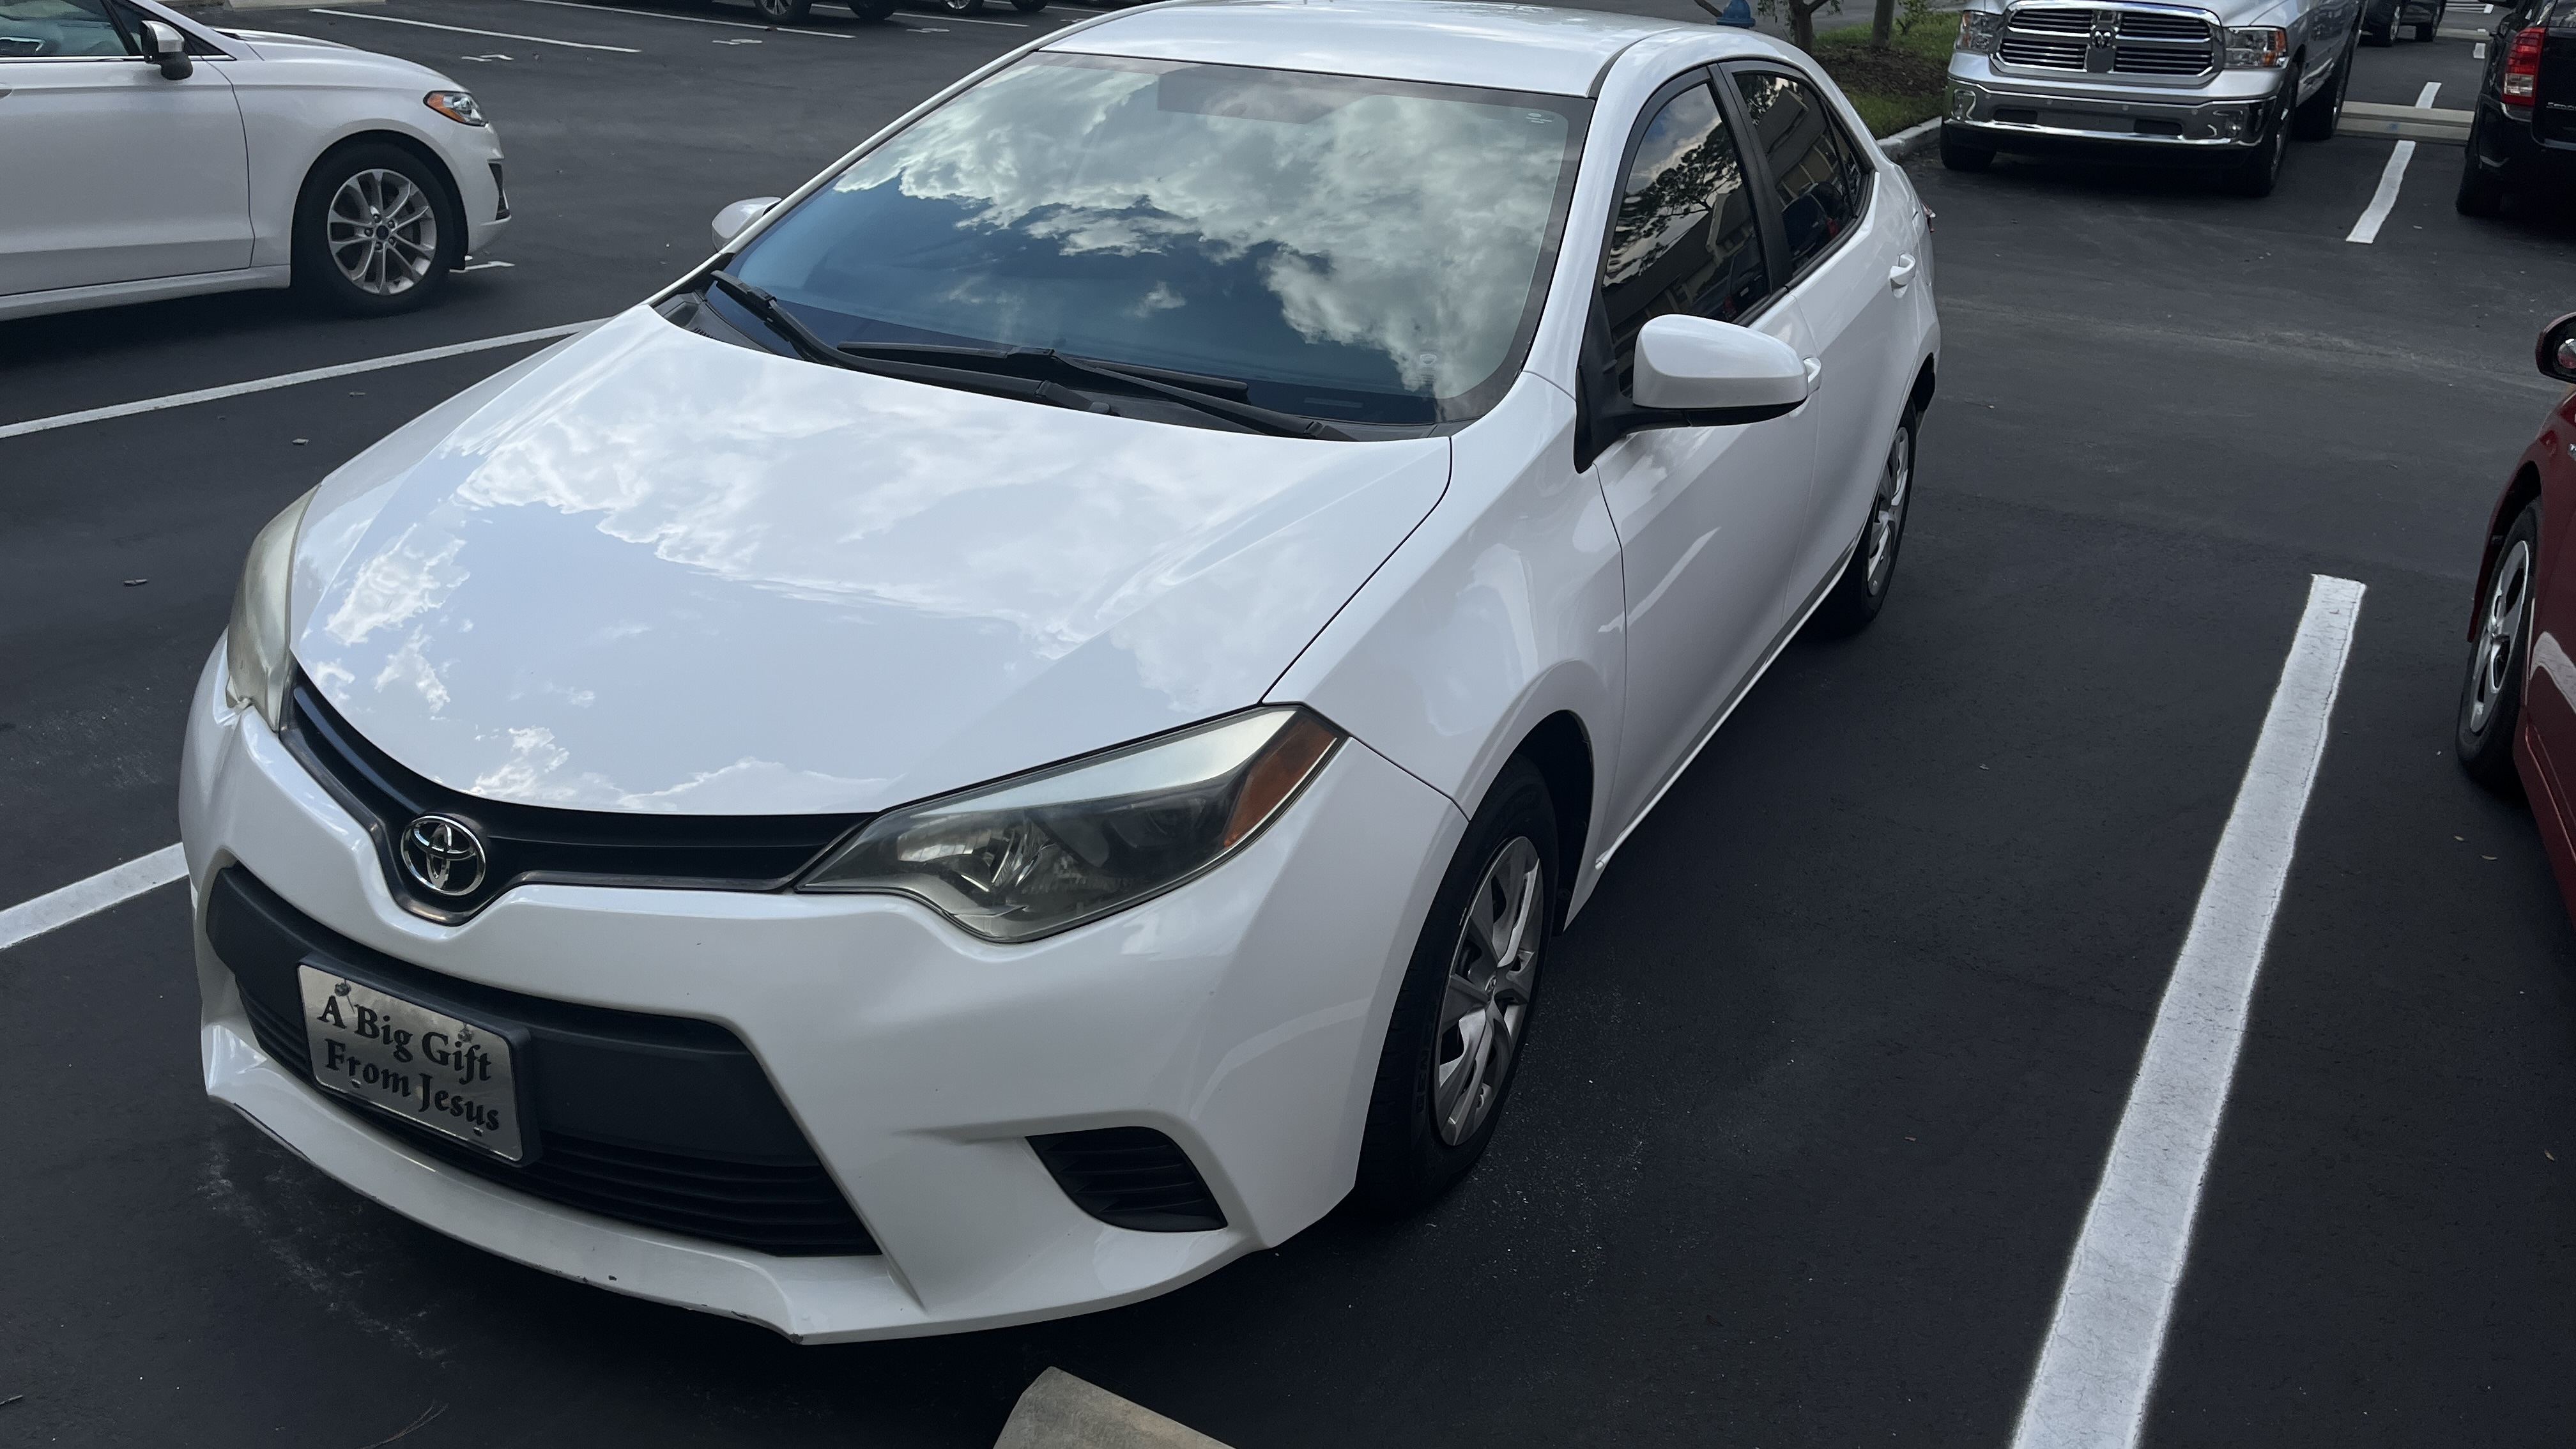 Used Toyota Corolla for Sale Right Now Under $10,000 - Autotrader